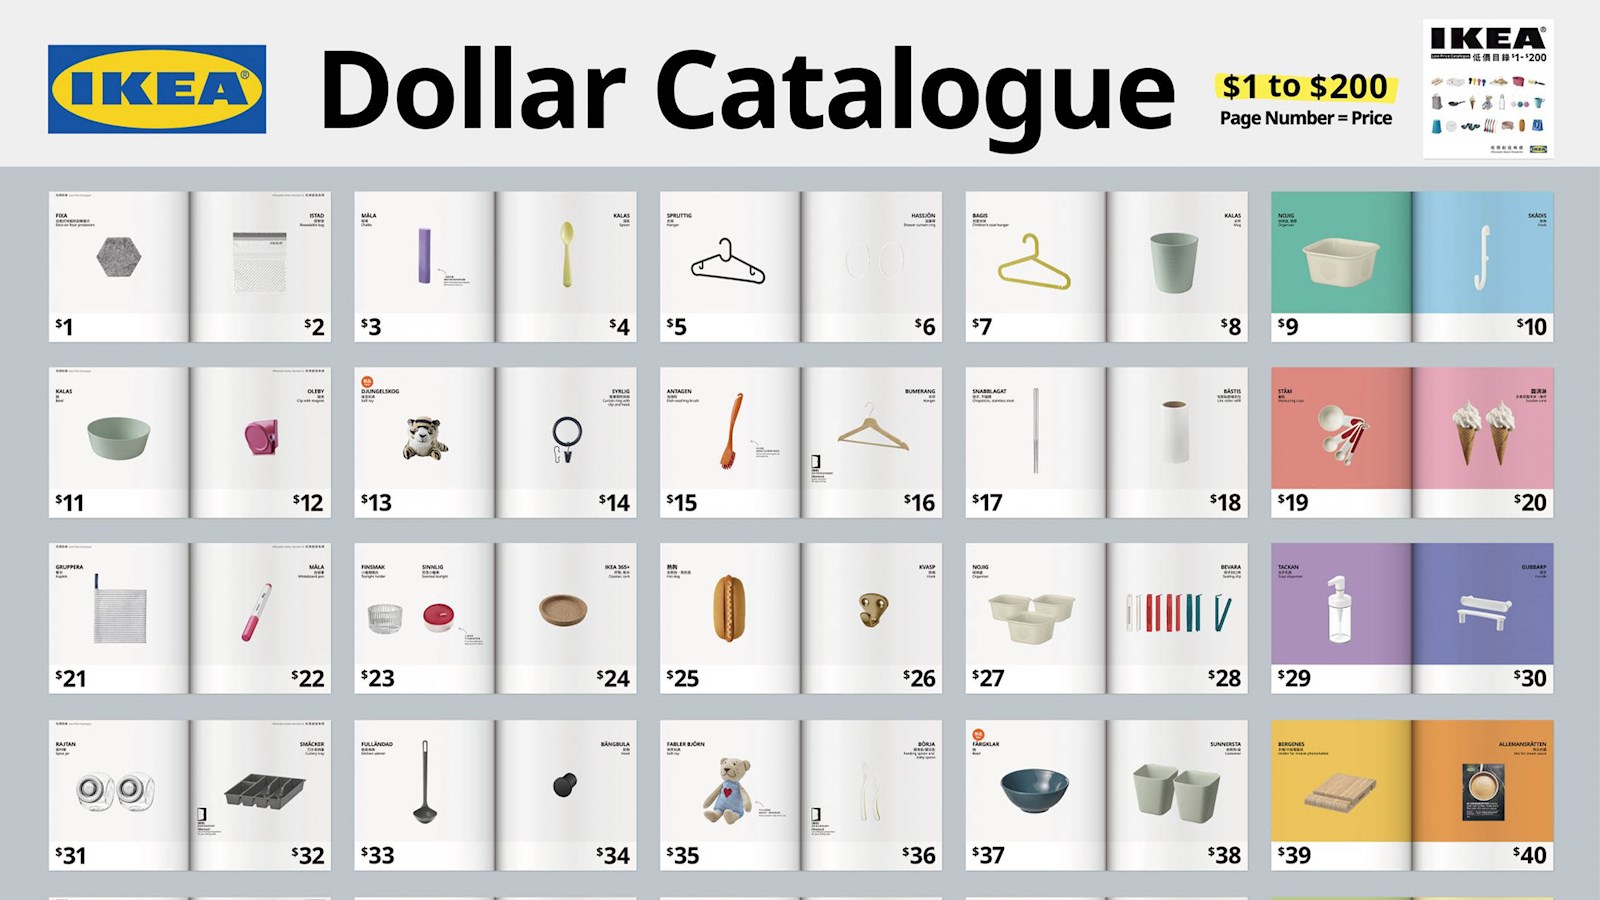 Pages of IKEA's Dollar Catalogue 